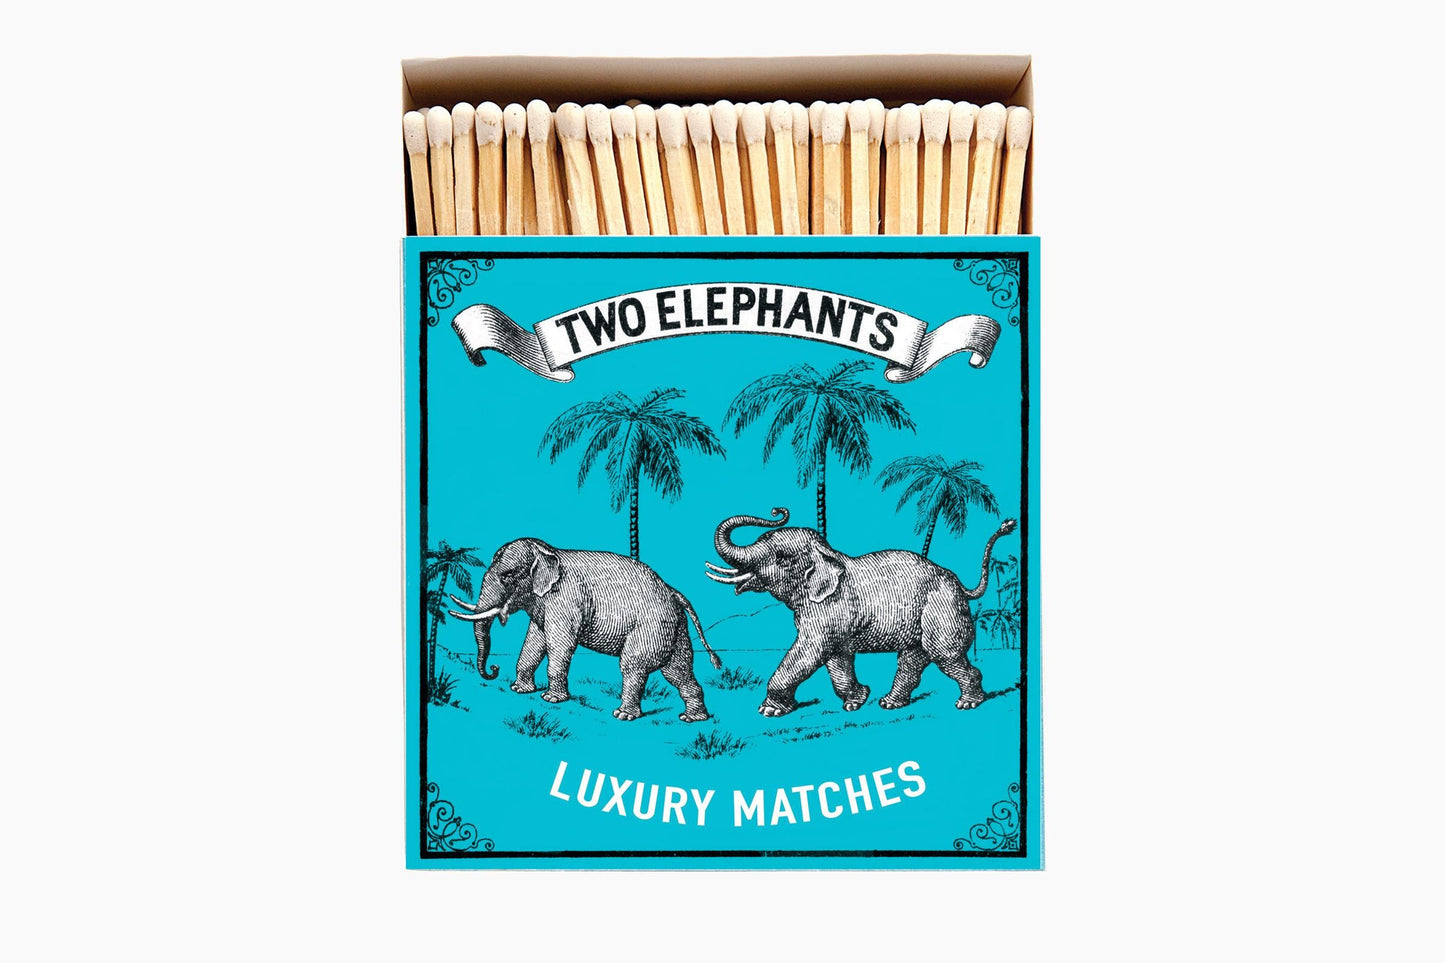 Two elephants matches